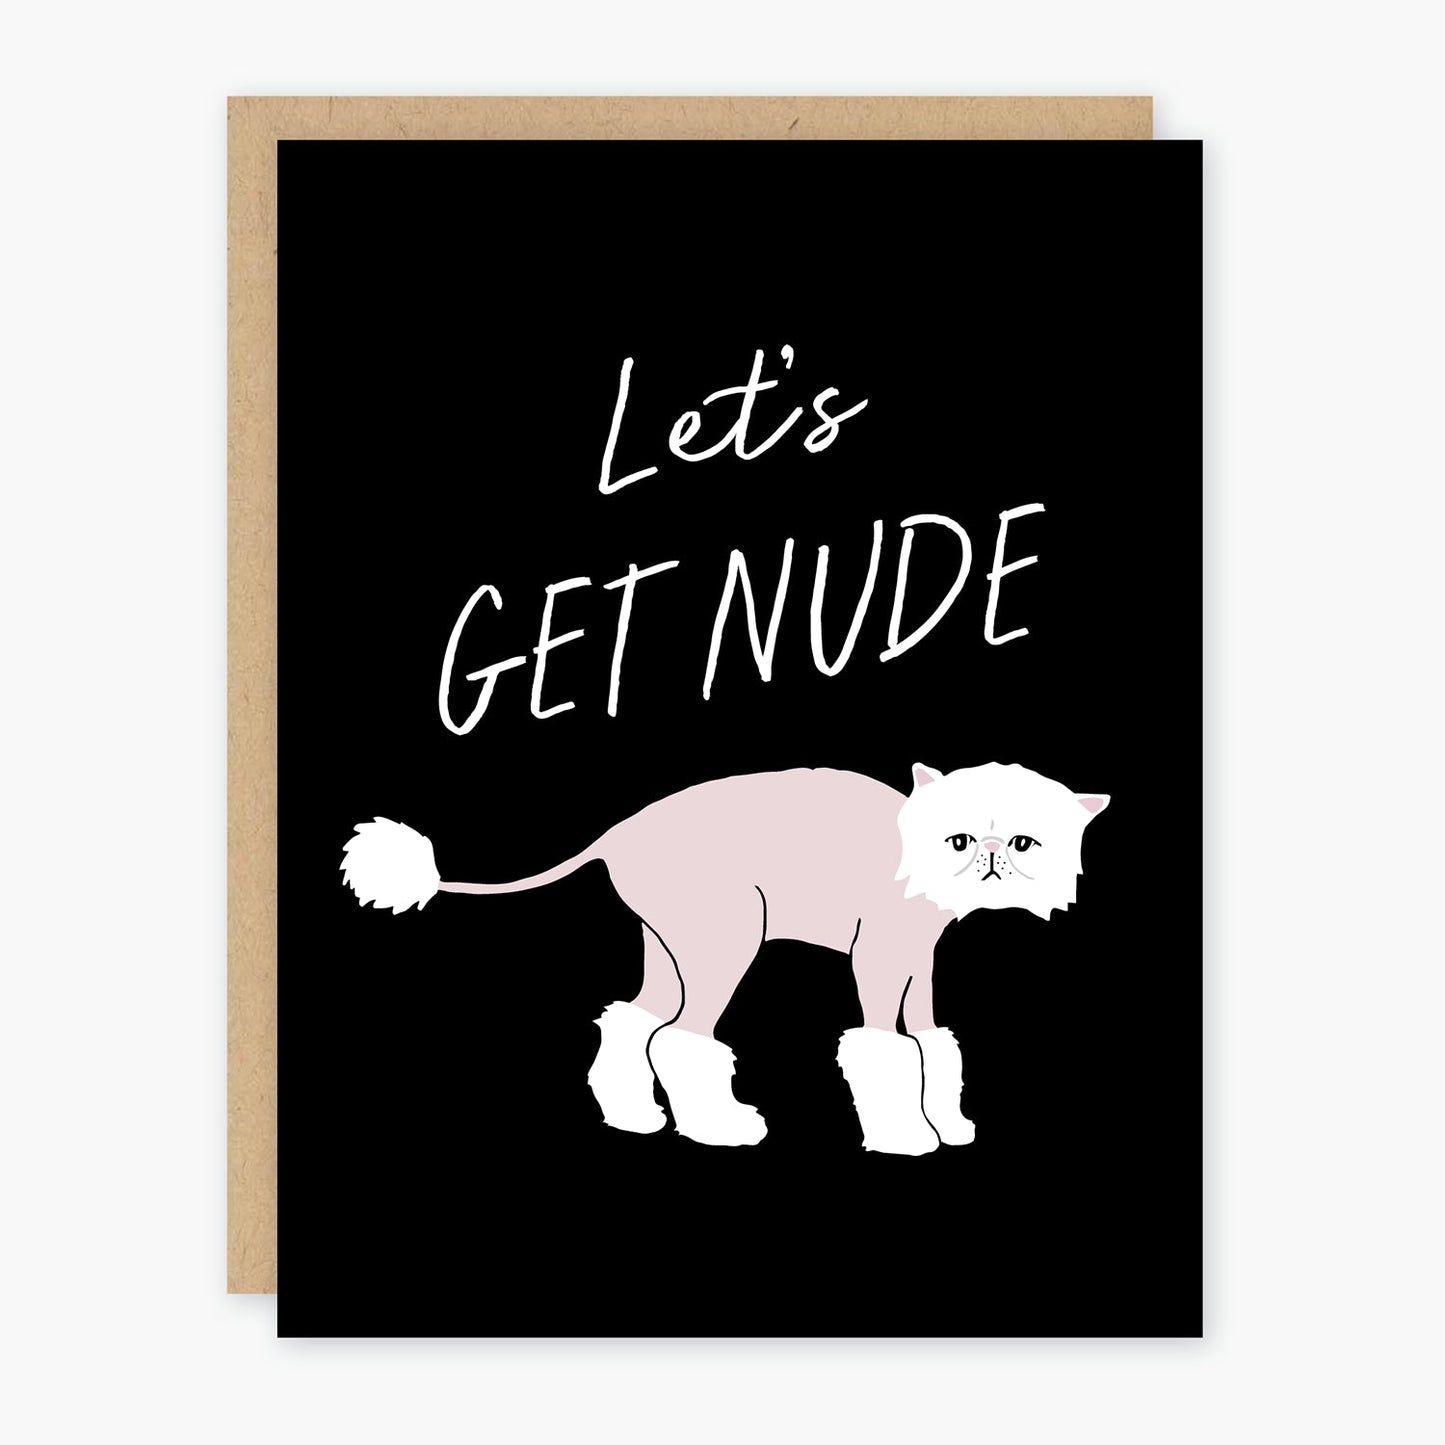 Let's Get Nude Black Greeting Card Featuring a Shaved Cat Motif